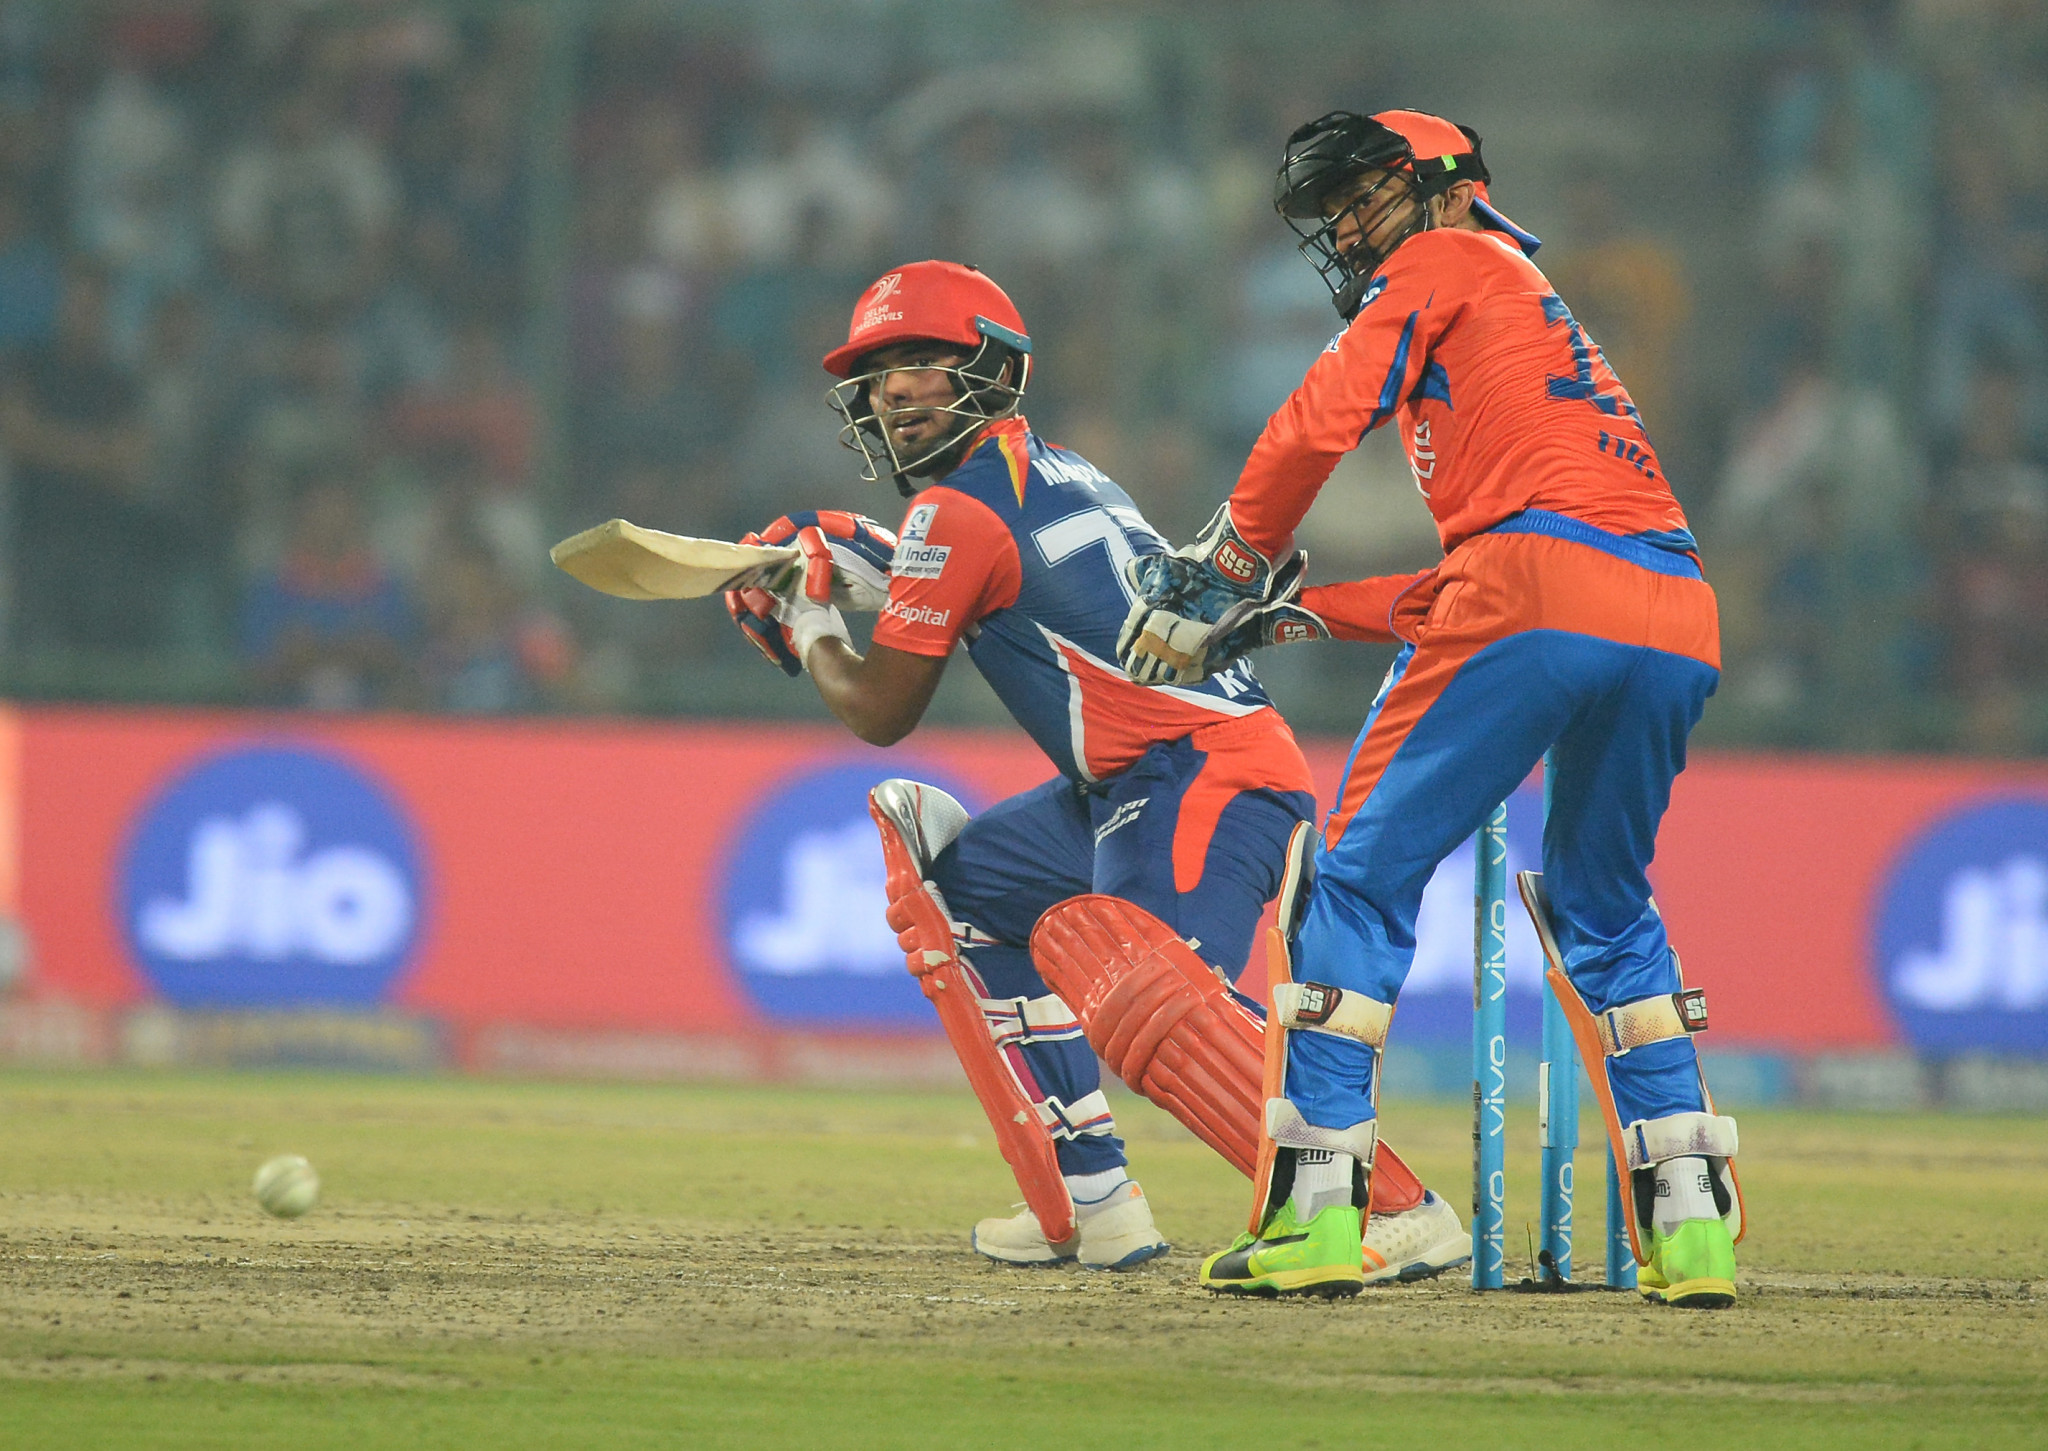 Indian Premier League cricket could be cancelled due to coronavirus lockdown